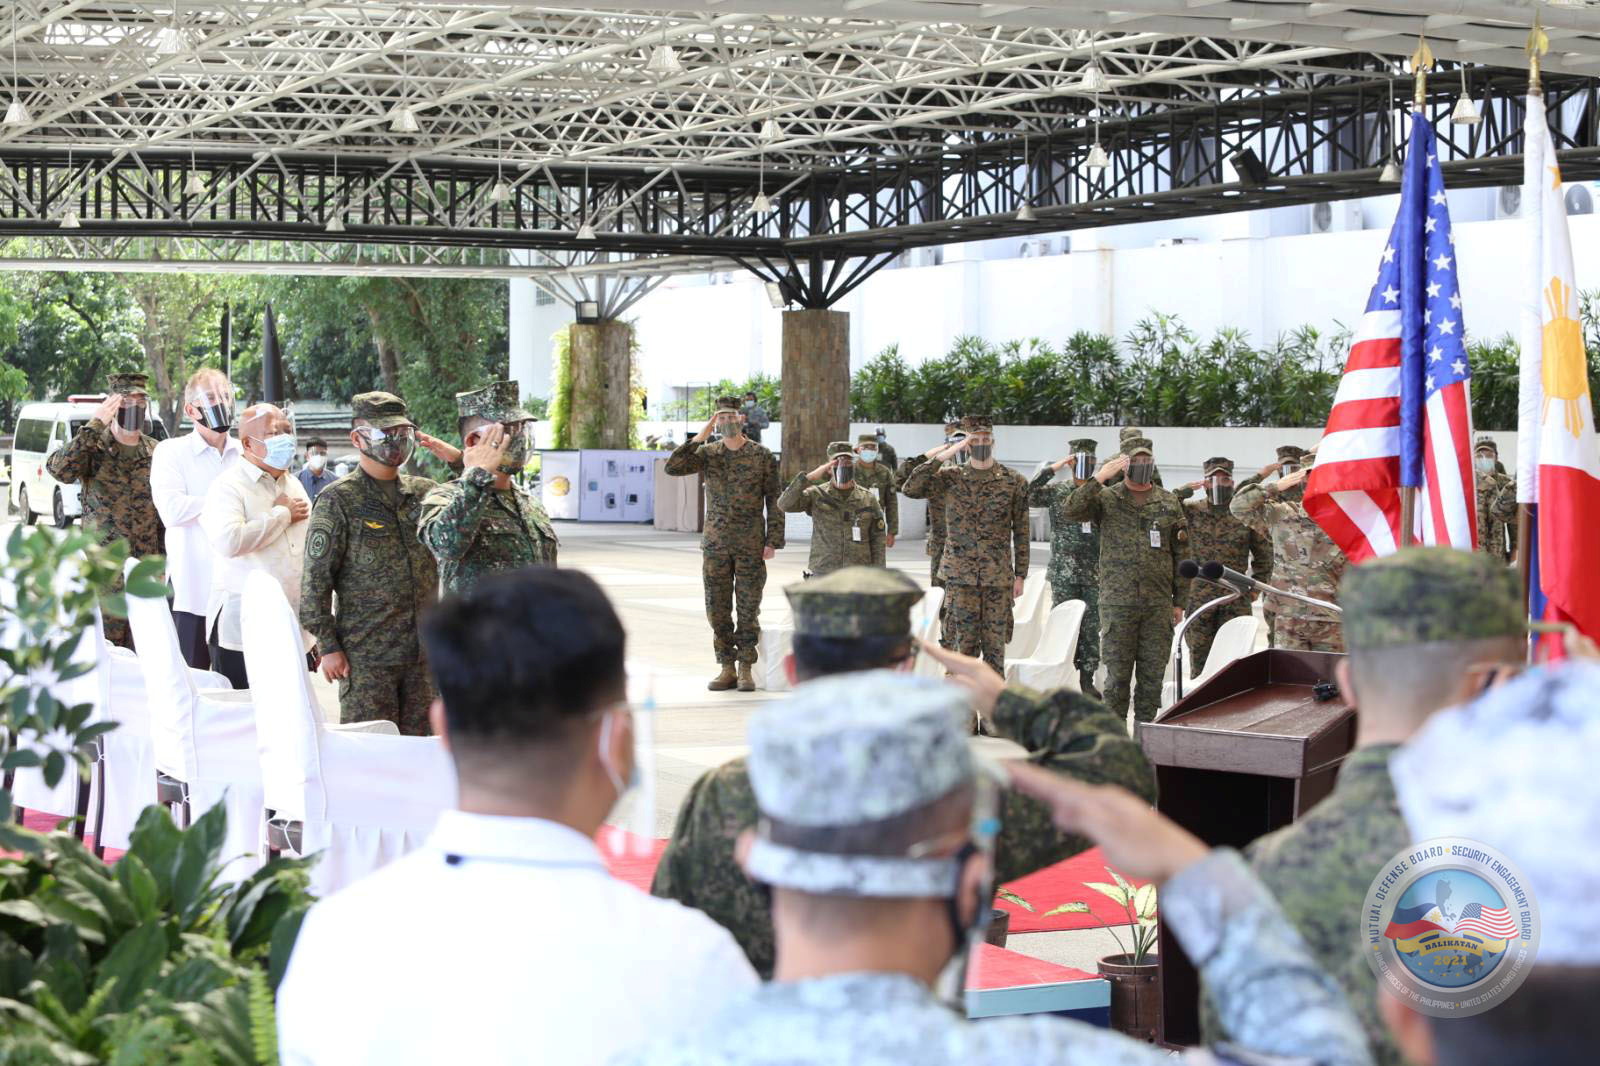 The Armed Forces of the Philippines (AFP) and United States Military open the 36th Balikatan Exercise (BK36-21) at Camp Aguinaldo